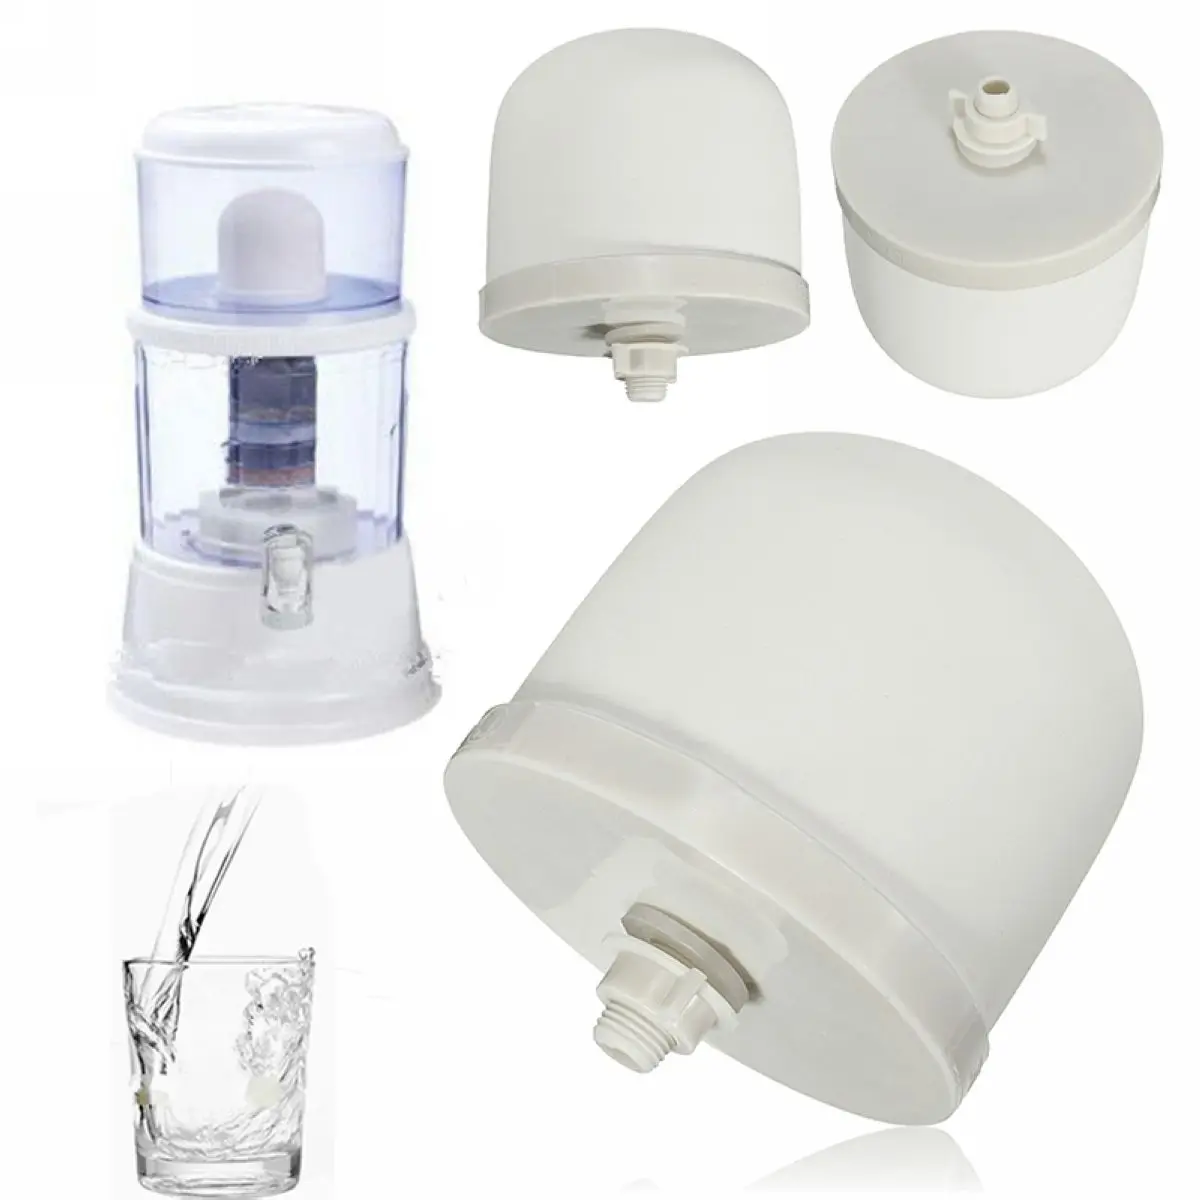 

New Water Filter System Cartridge Mineral Purifier 0.2 to 0.5 micron Ceramic Dome